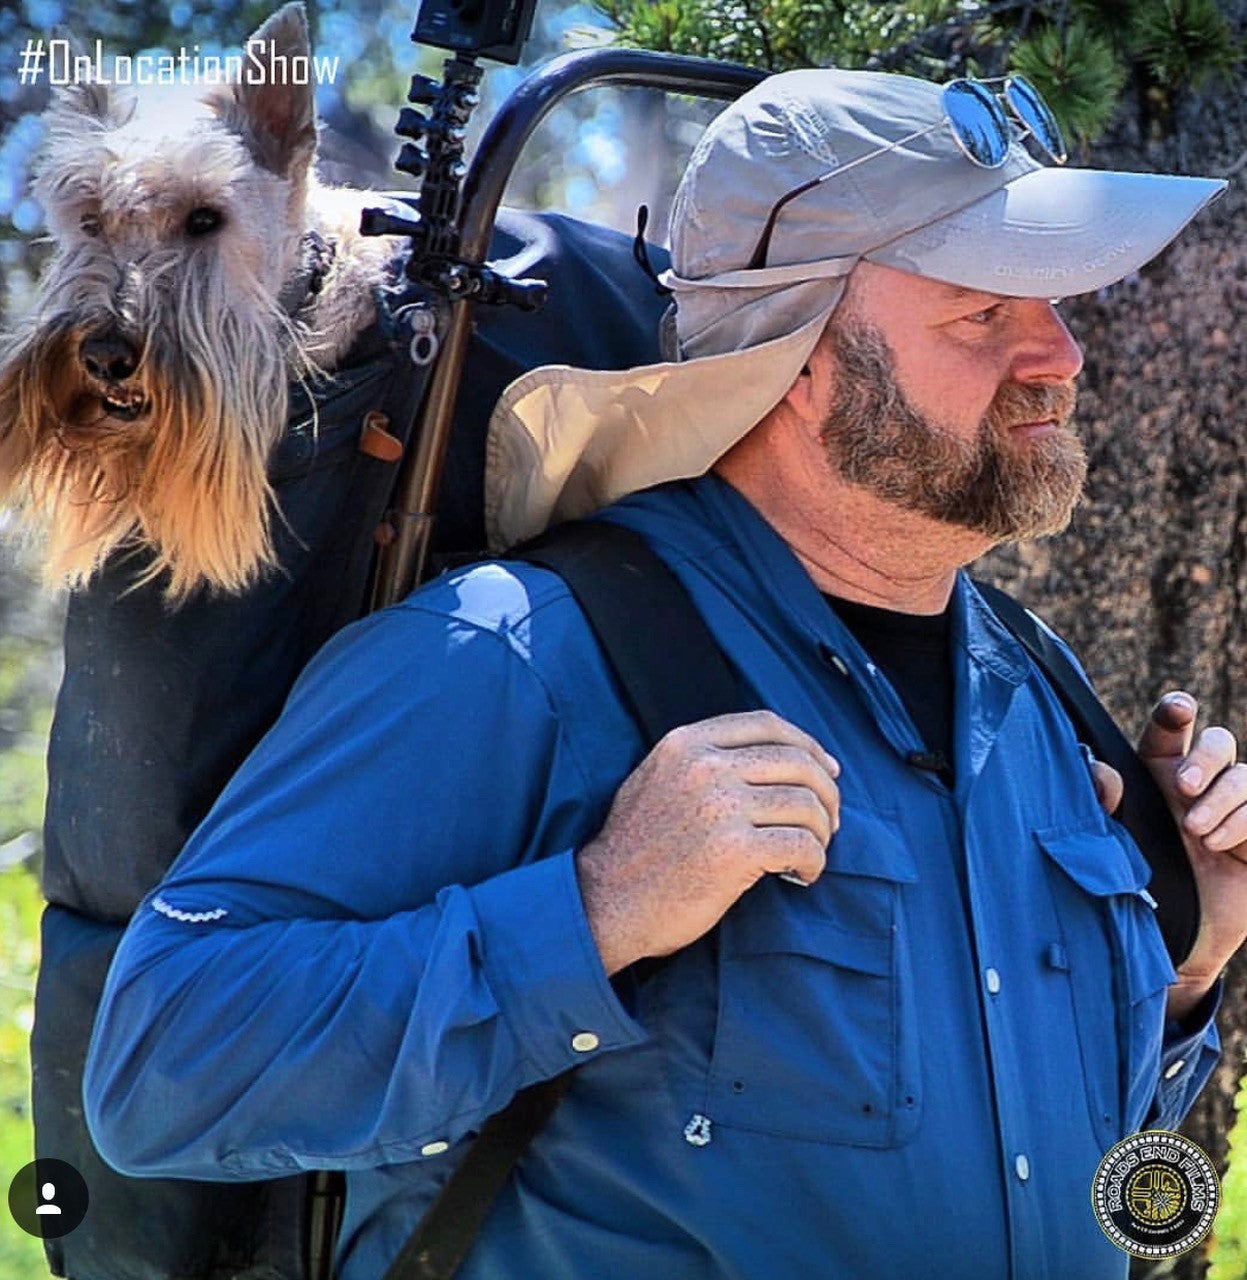 The Mojave Hat is rated at the maximum protection of UPF 50+ and is our best-selling sun protection hat. Providing shade for the face and back of the neck, this hat is designed to keep you outdoors longer.